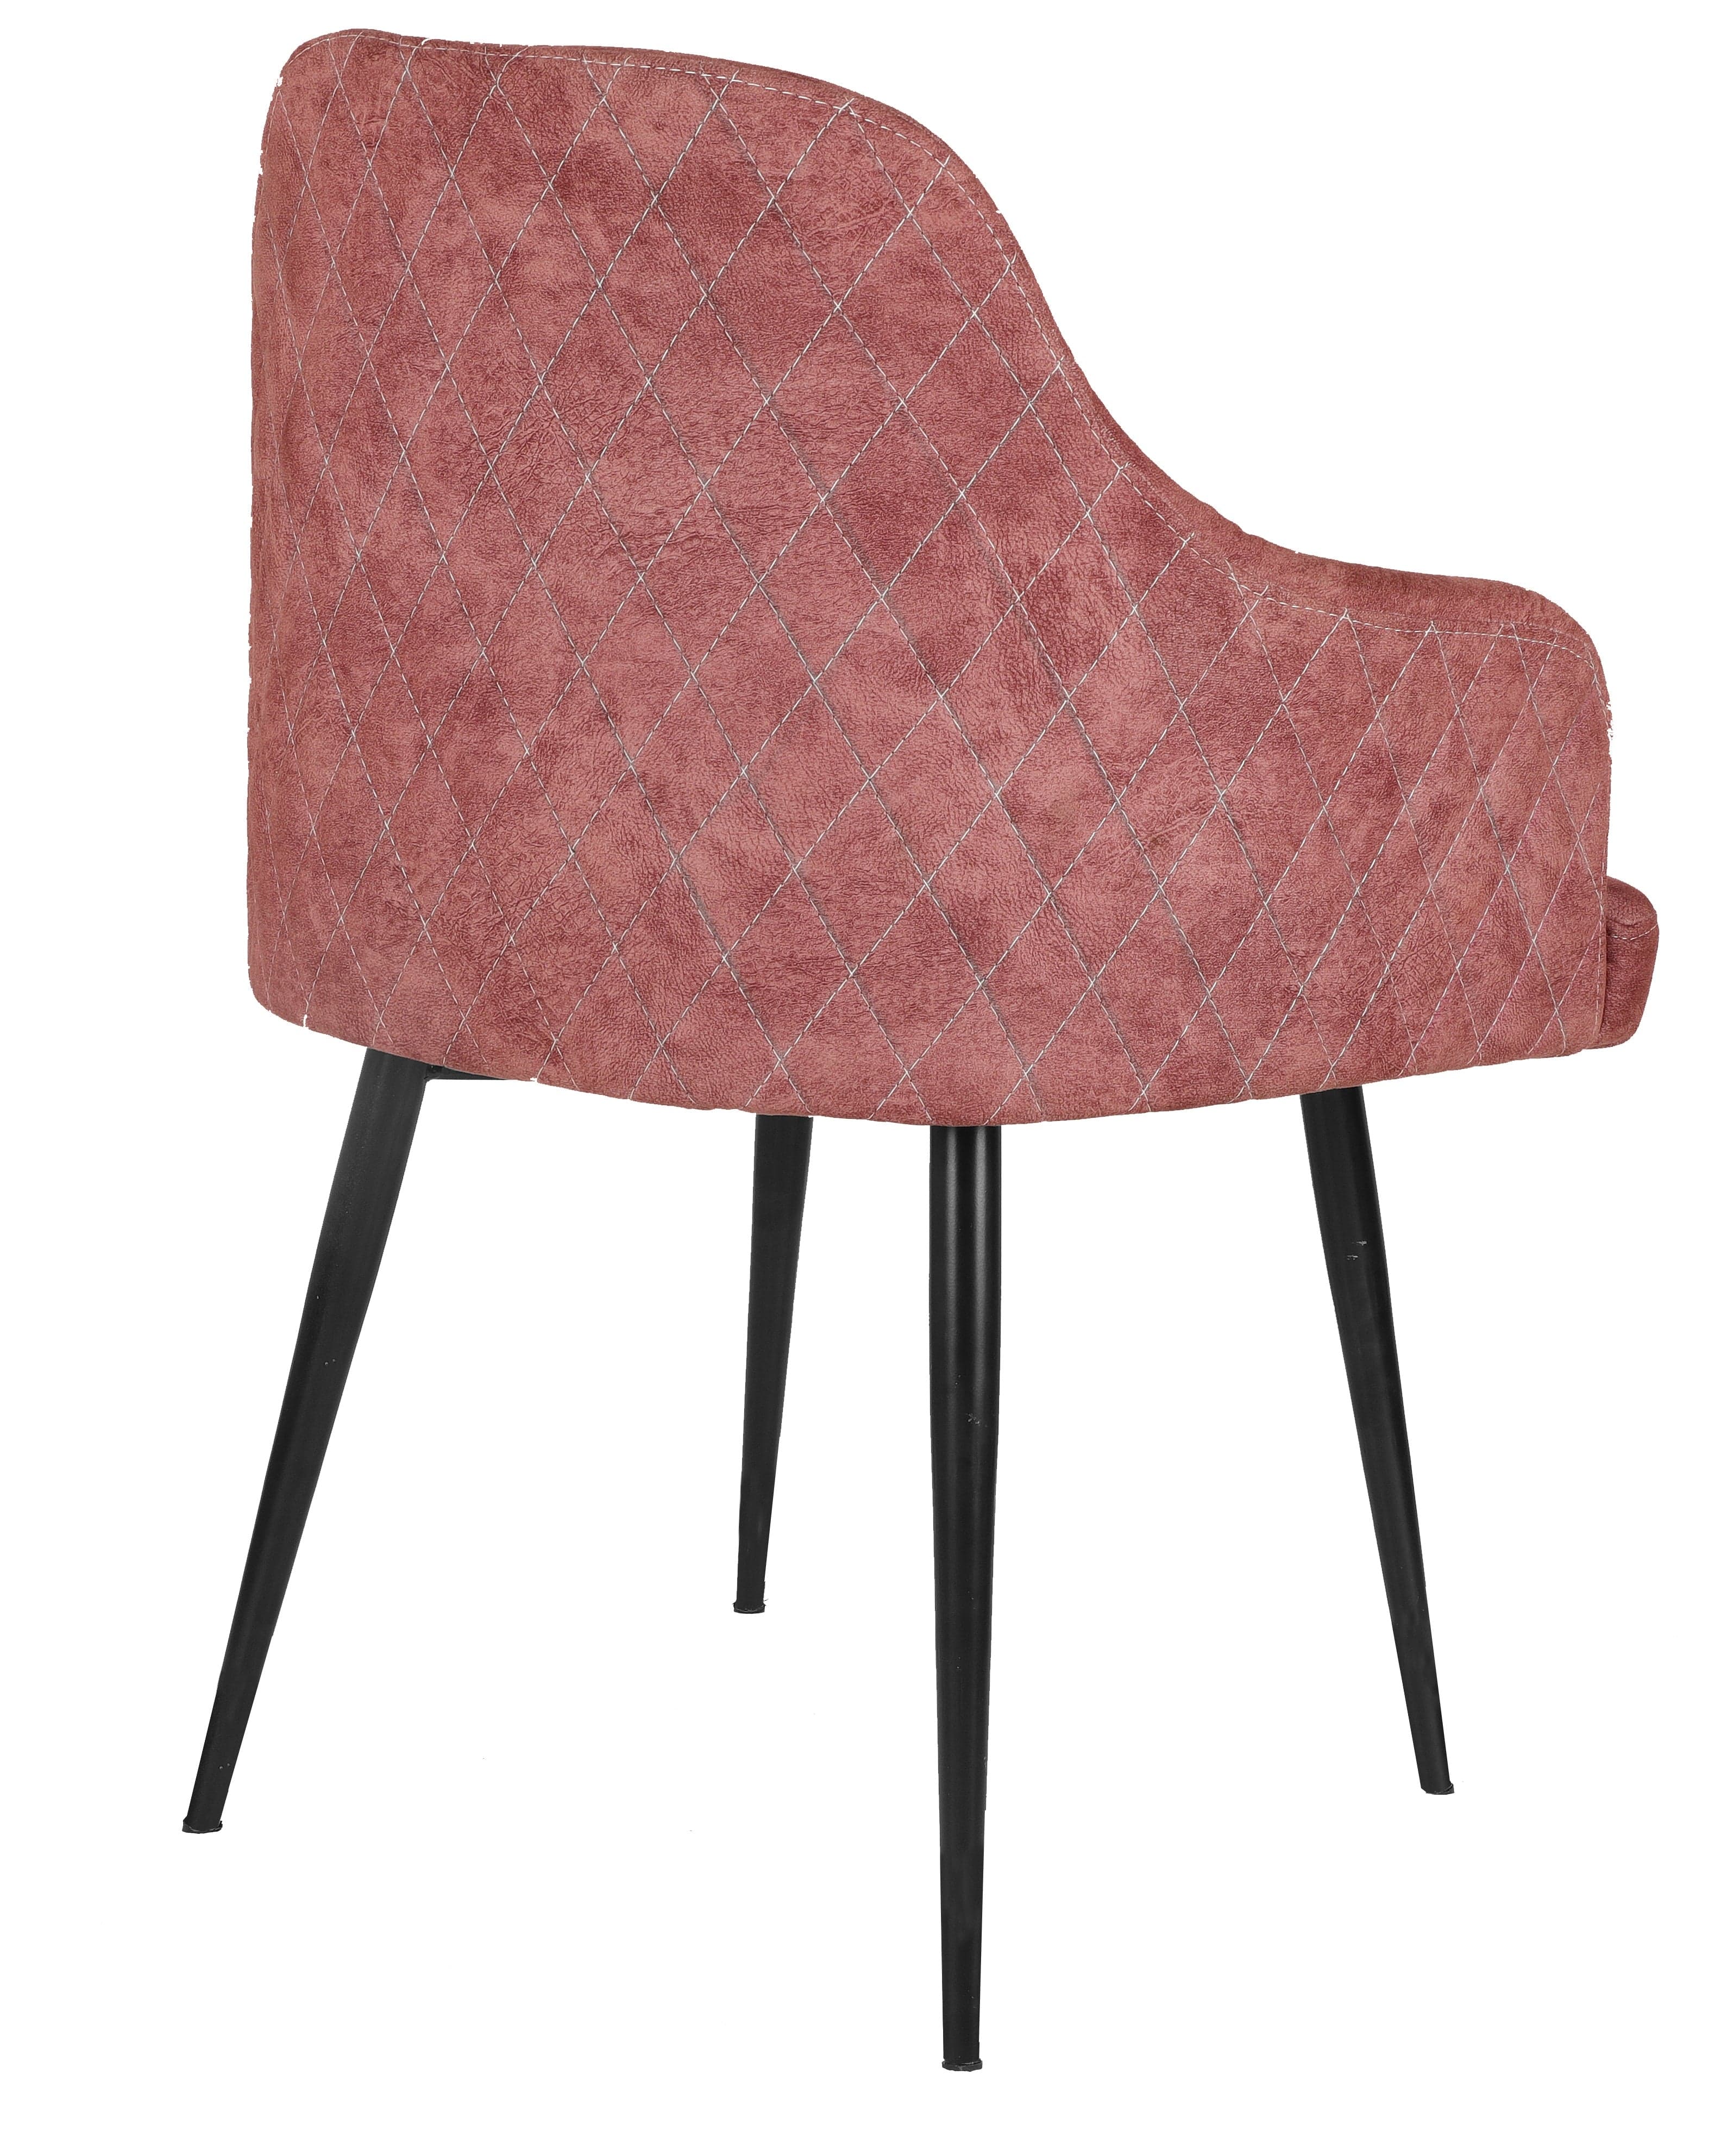 Adiko Lounge Chair Stool in Cherry Color